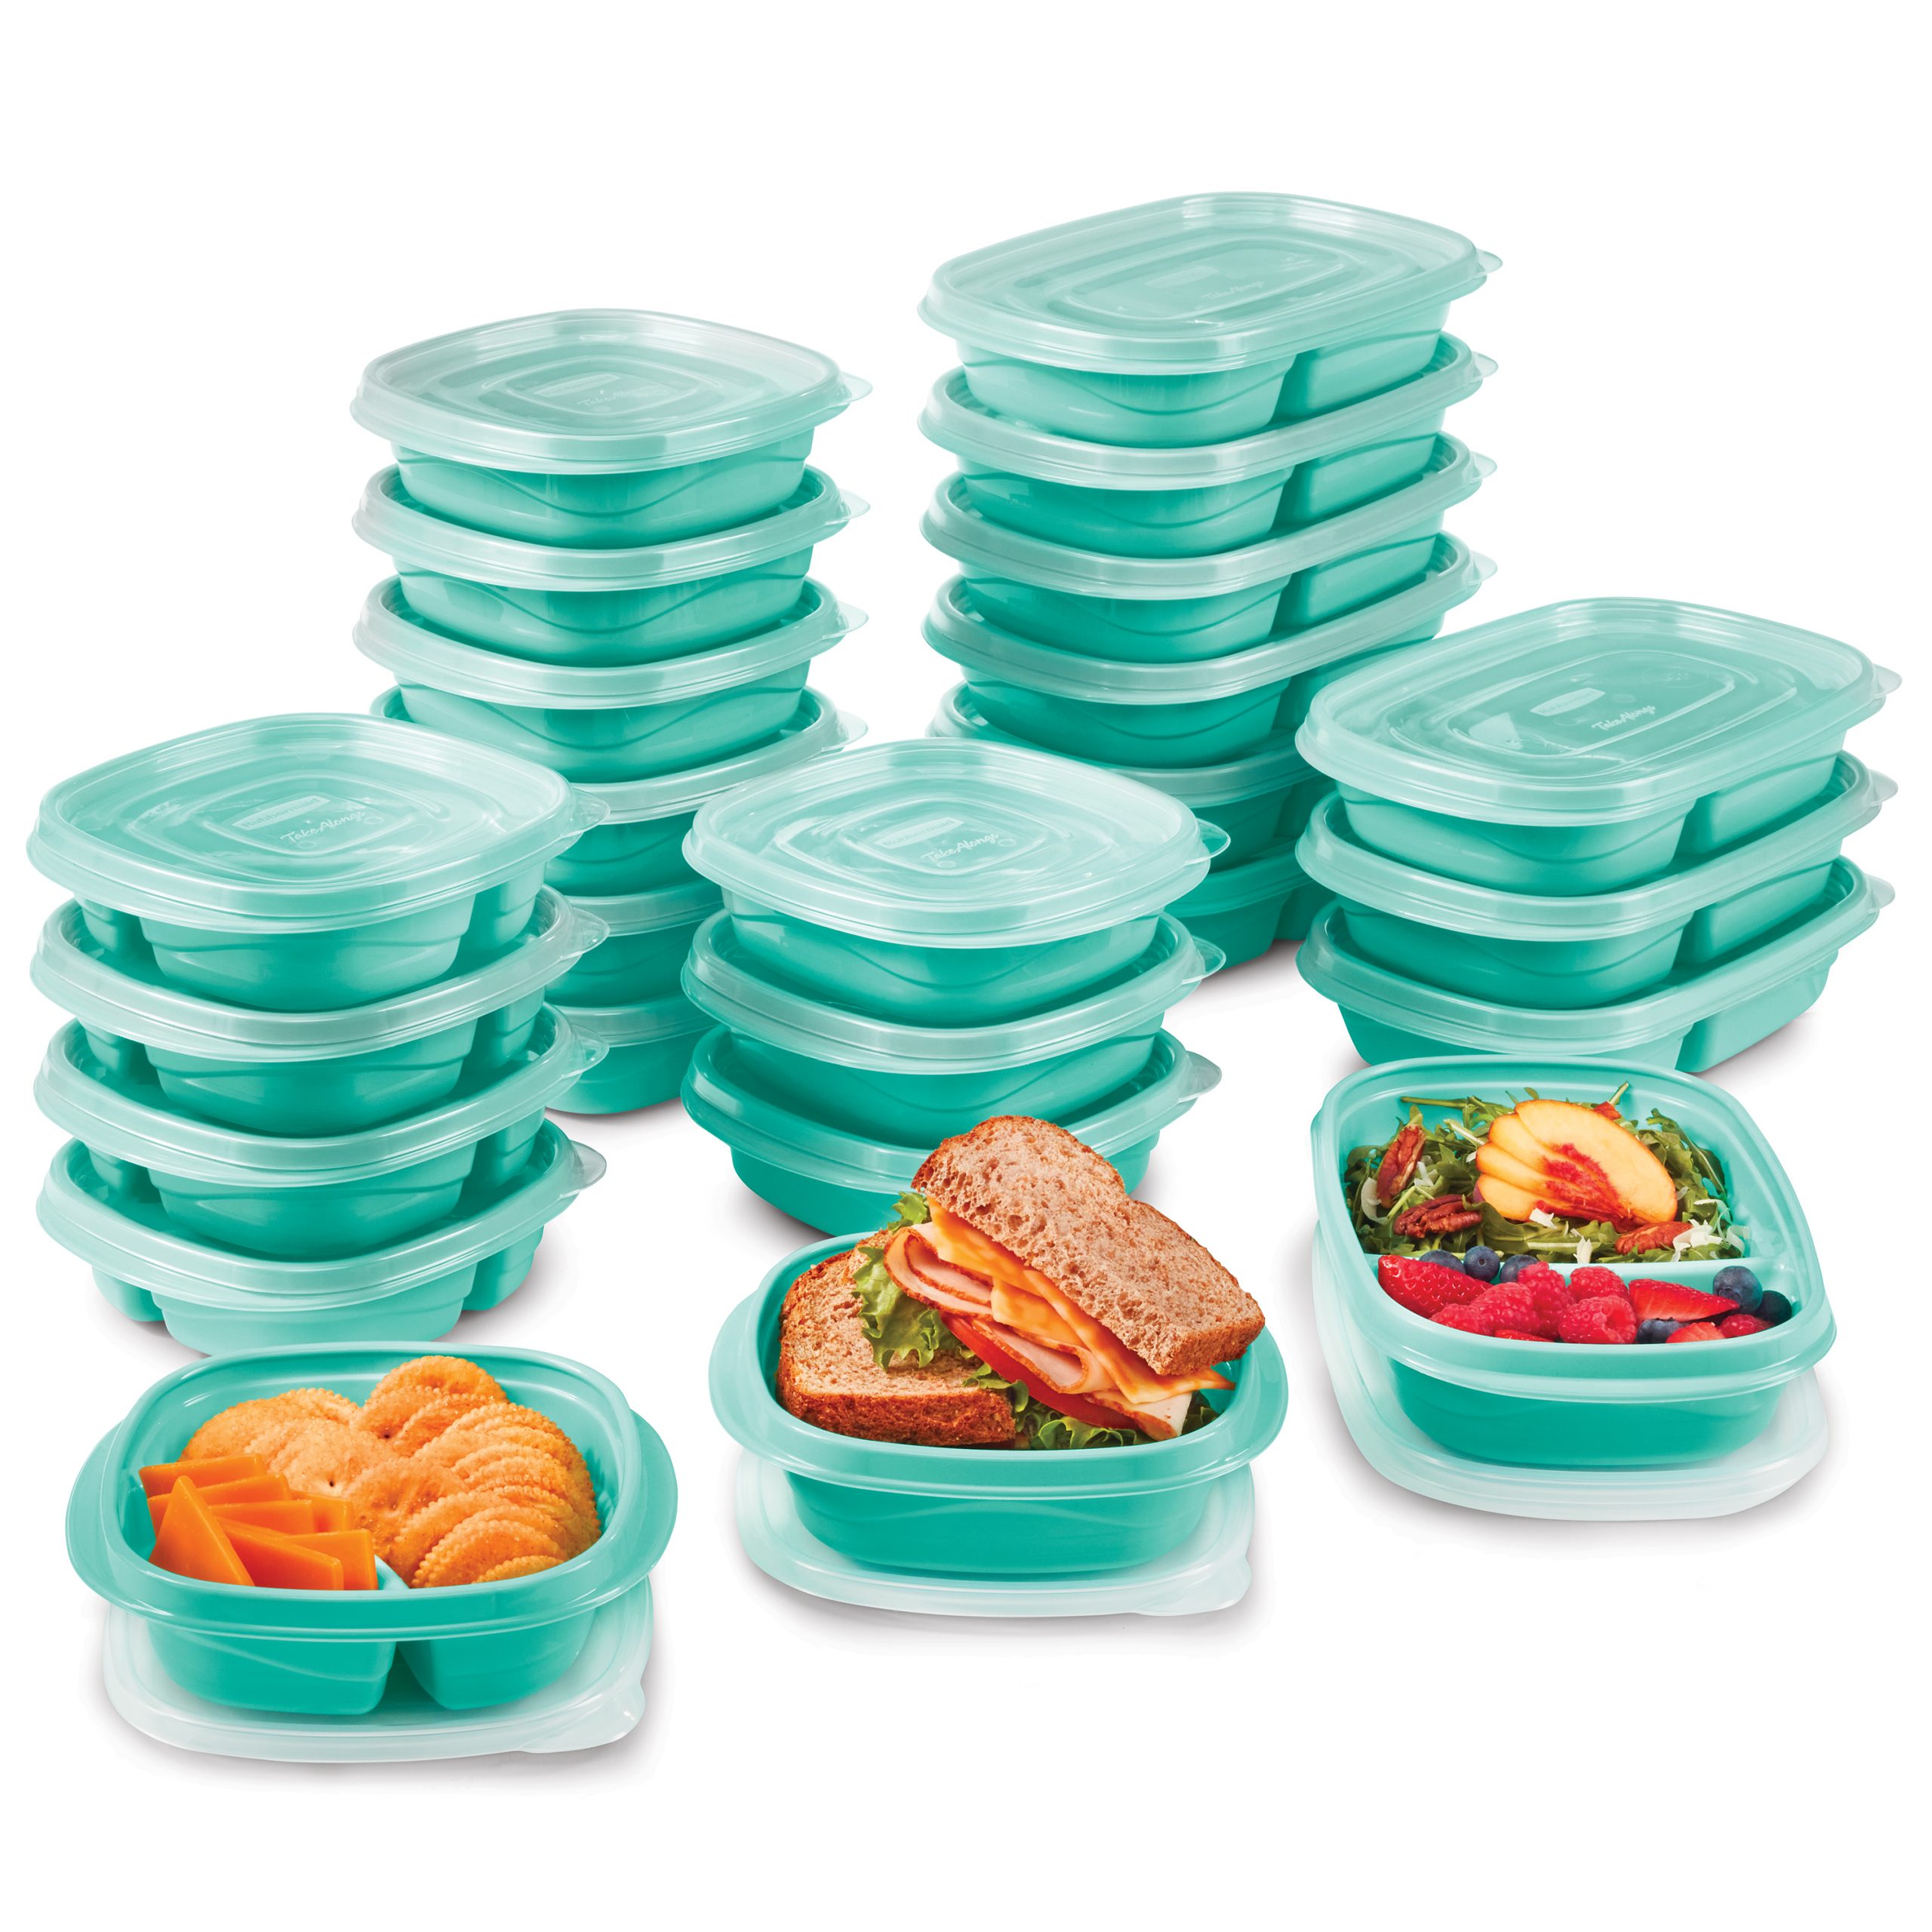 https://www.afrugalchick.com/wp-content/uploads/2021/08/rubbermaid-teal-scaled.jpeg